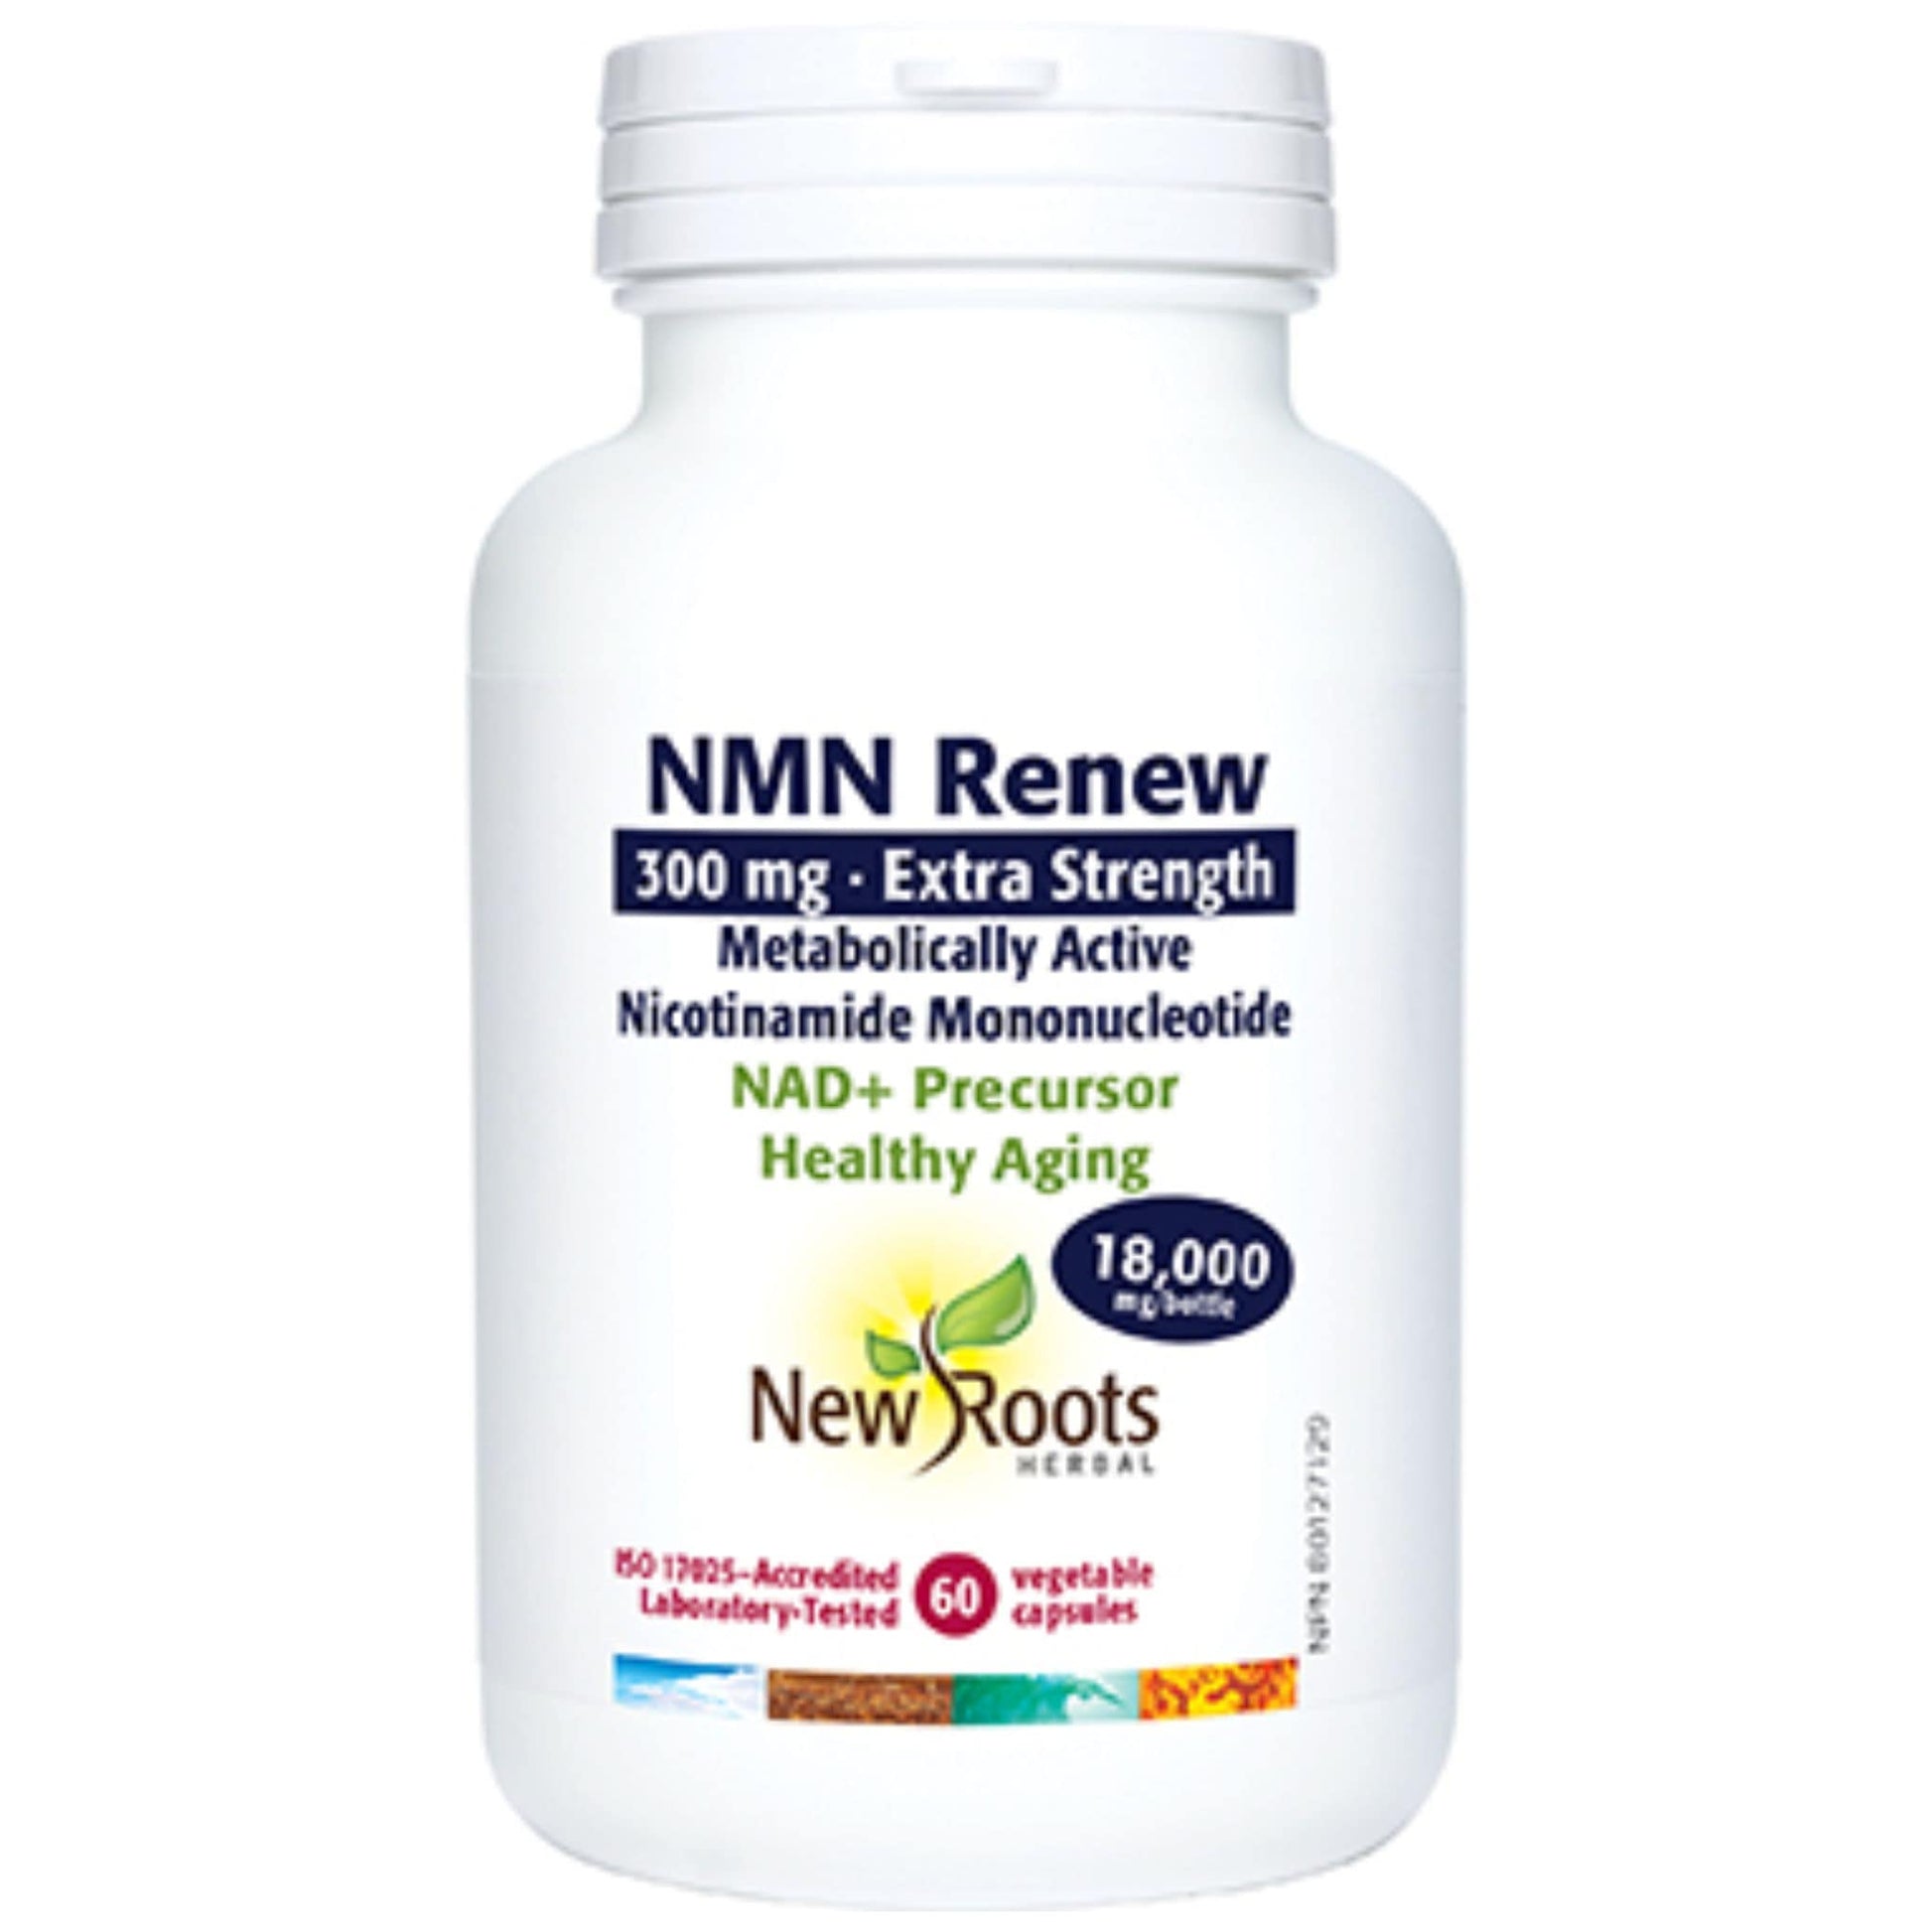 60 Vegetable Capsules | New Roots Herbal NMN Renew Extra Strength